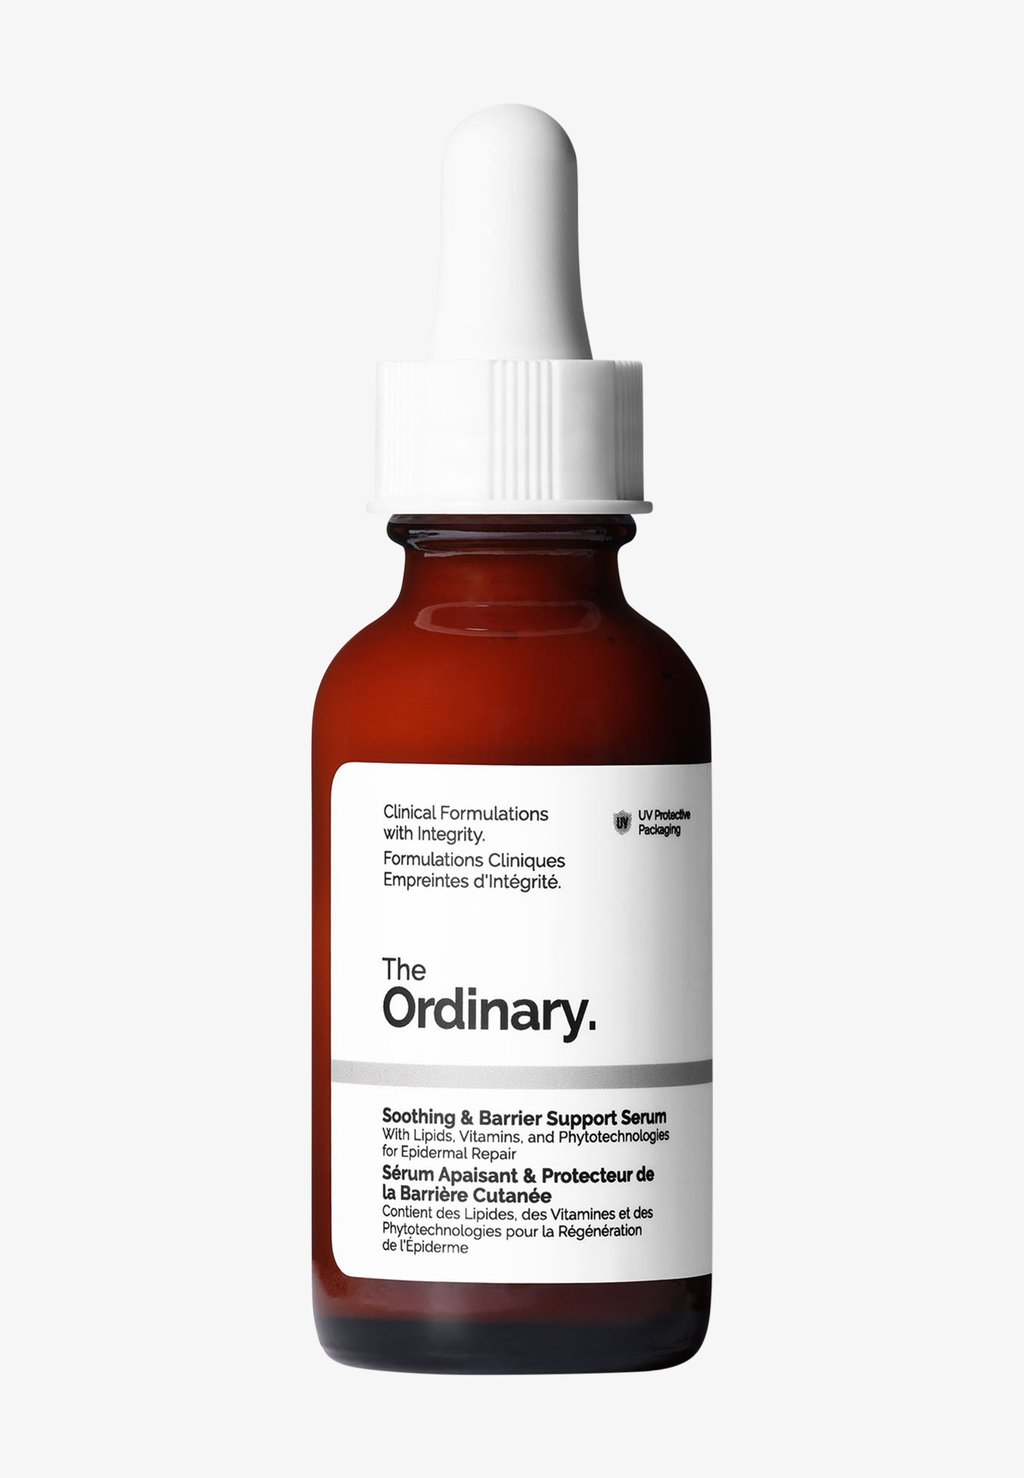 Сыворотка Soothing & Barrier Support Serum The Ordinary the ordinary skin support